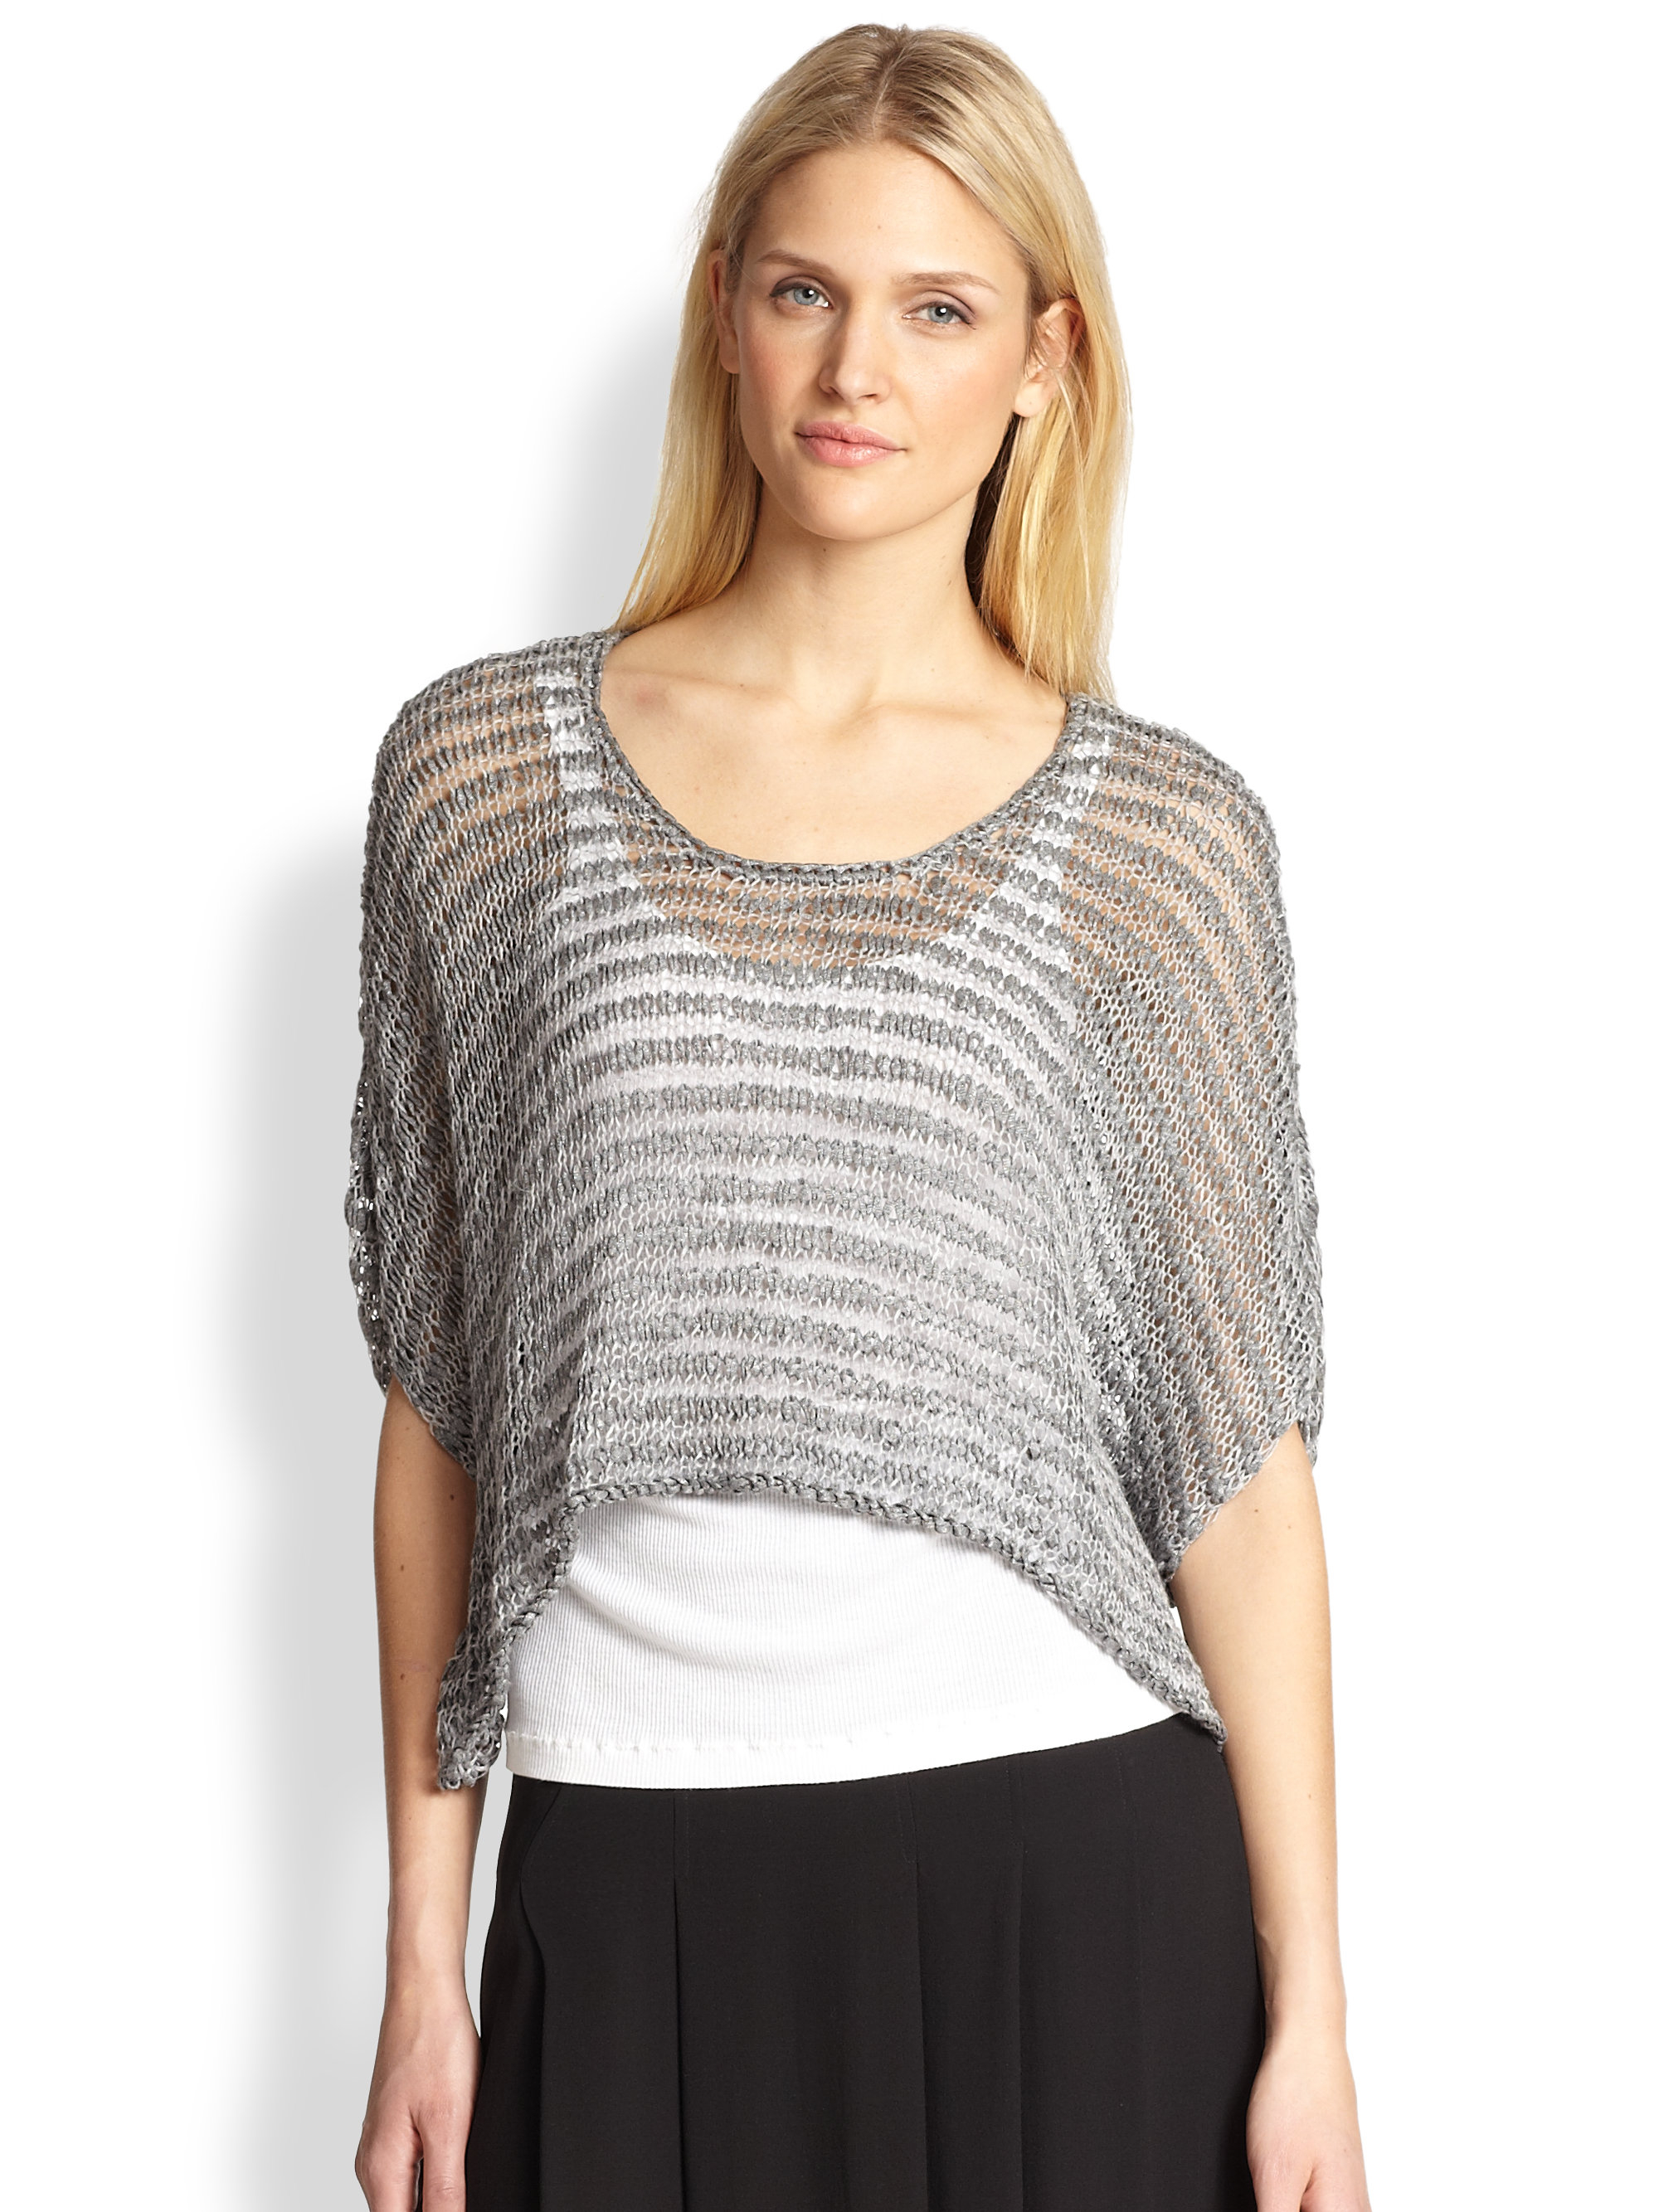 Lyst - Eileen Fisher Openweave Boxy Sweater in Gray